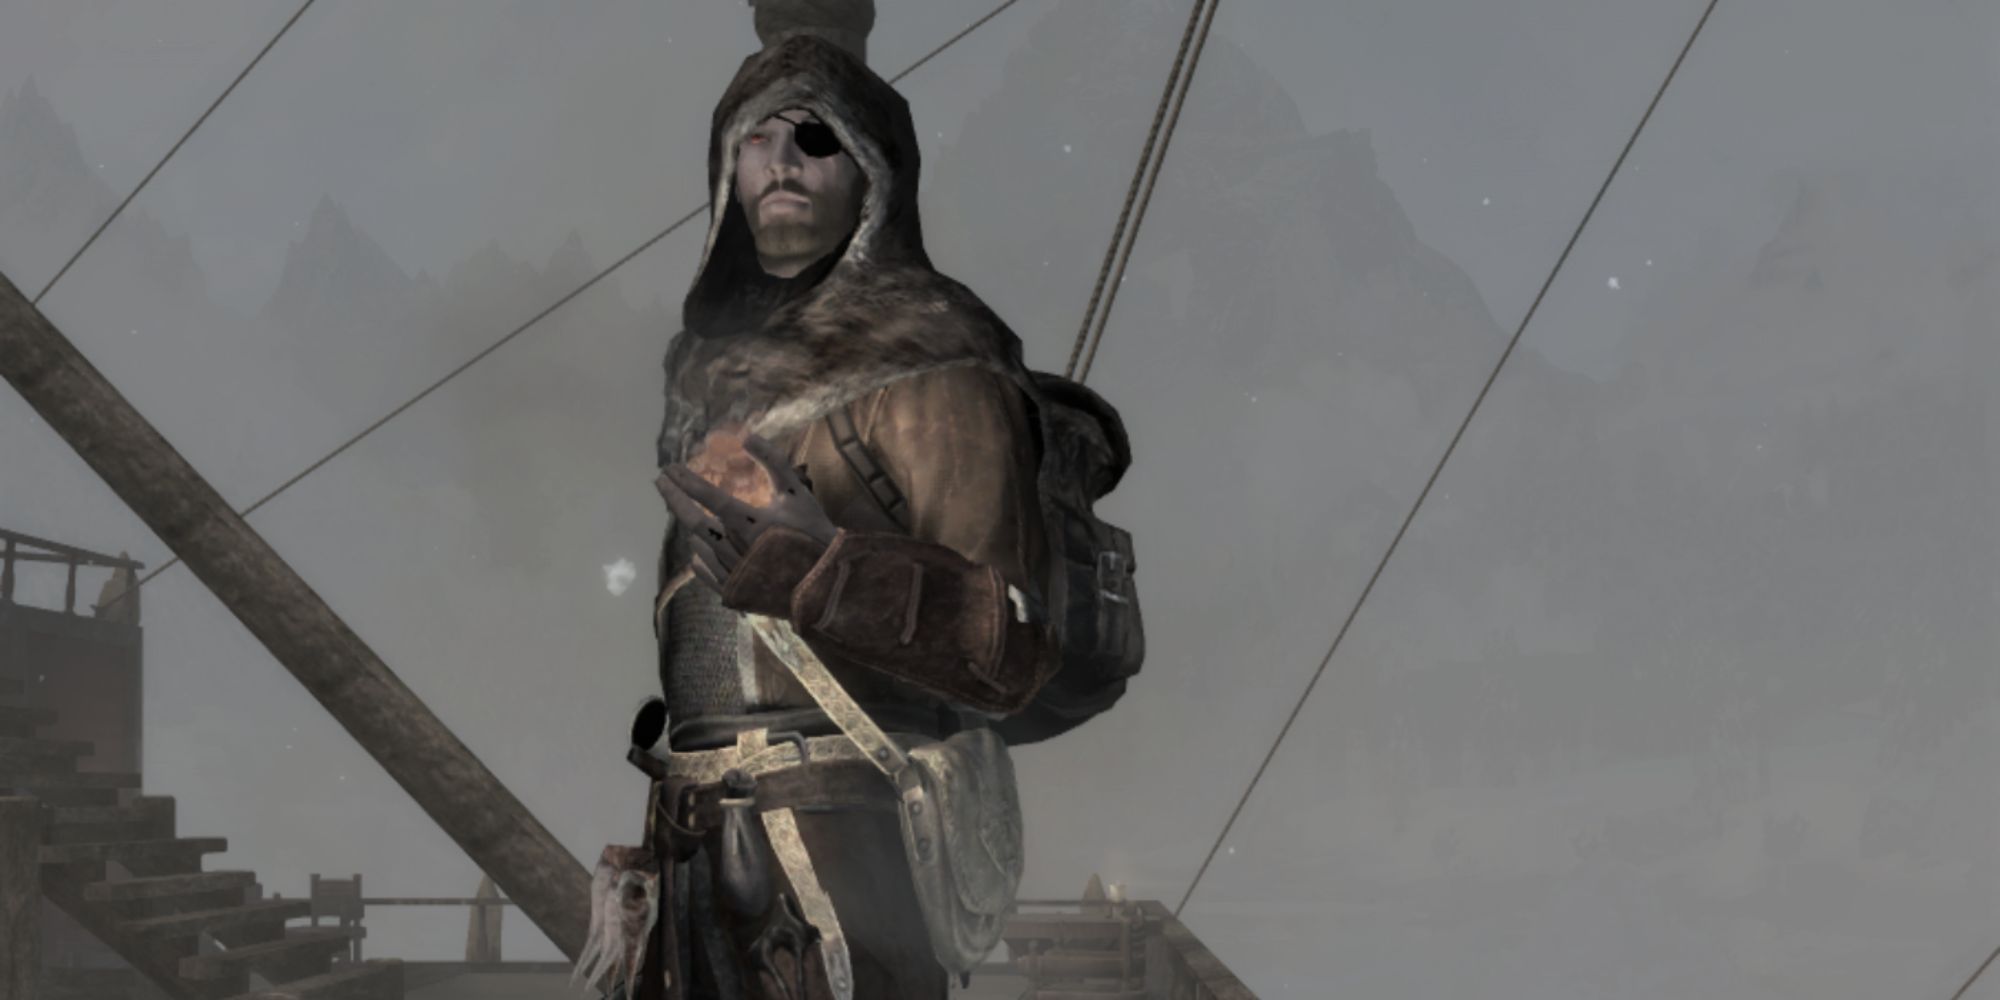 A breton stealth mage on a boat